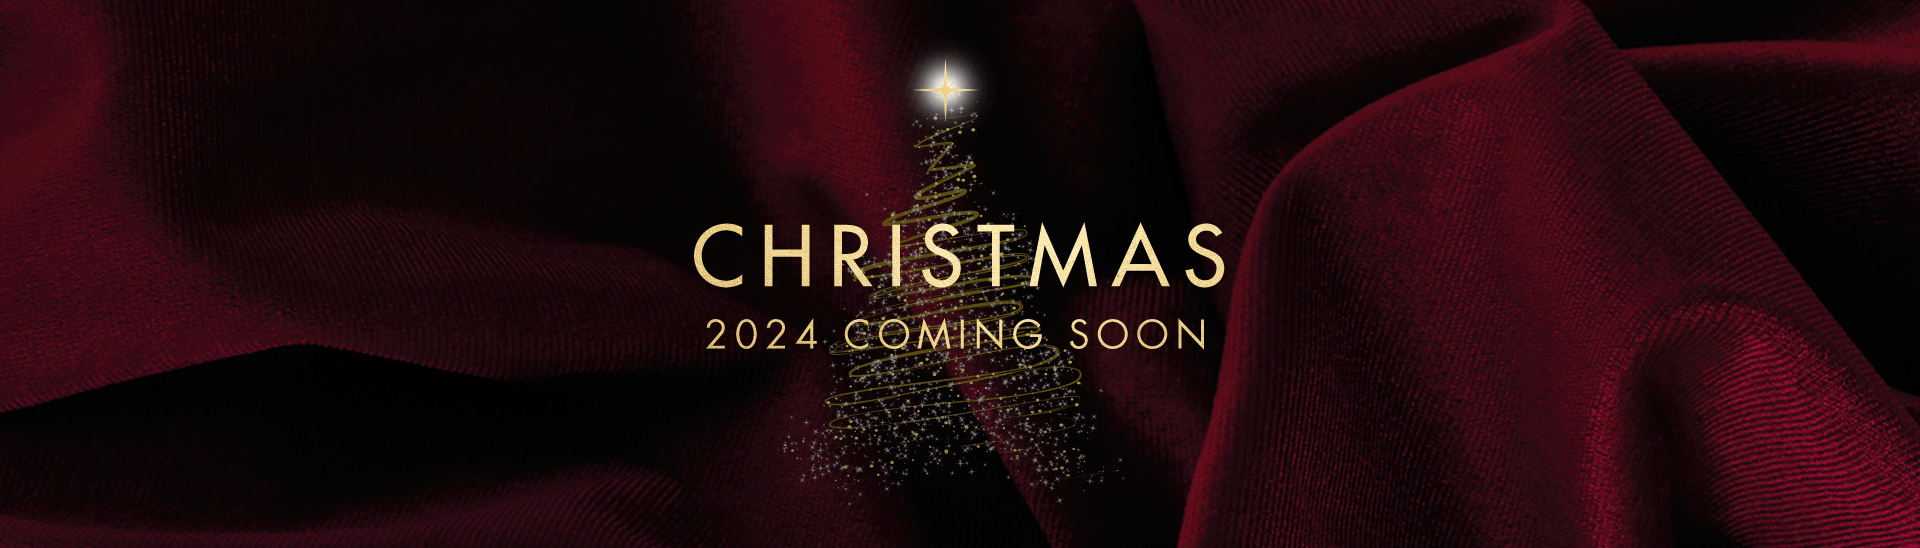 Christmas 2024 at Oxfordshire